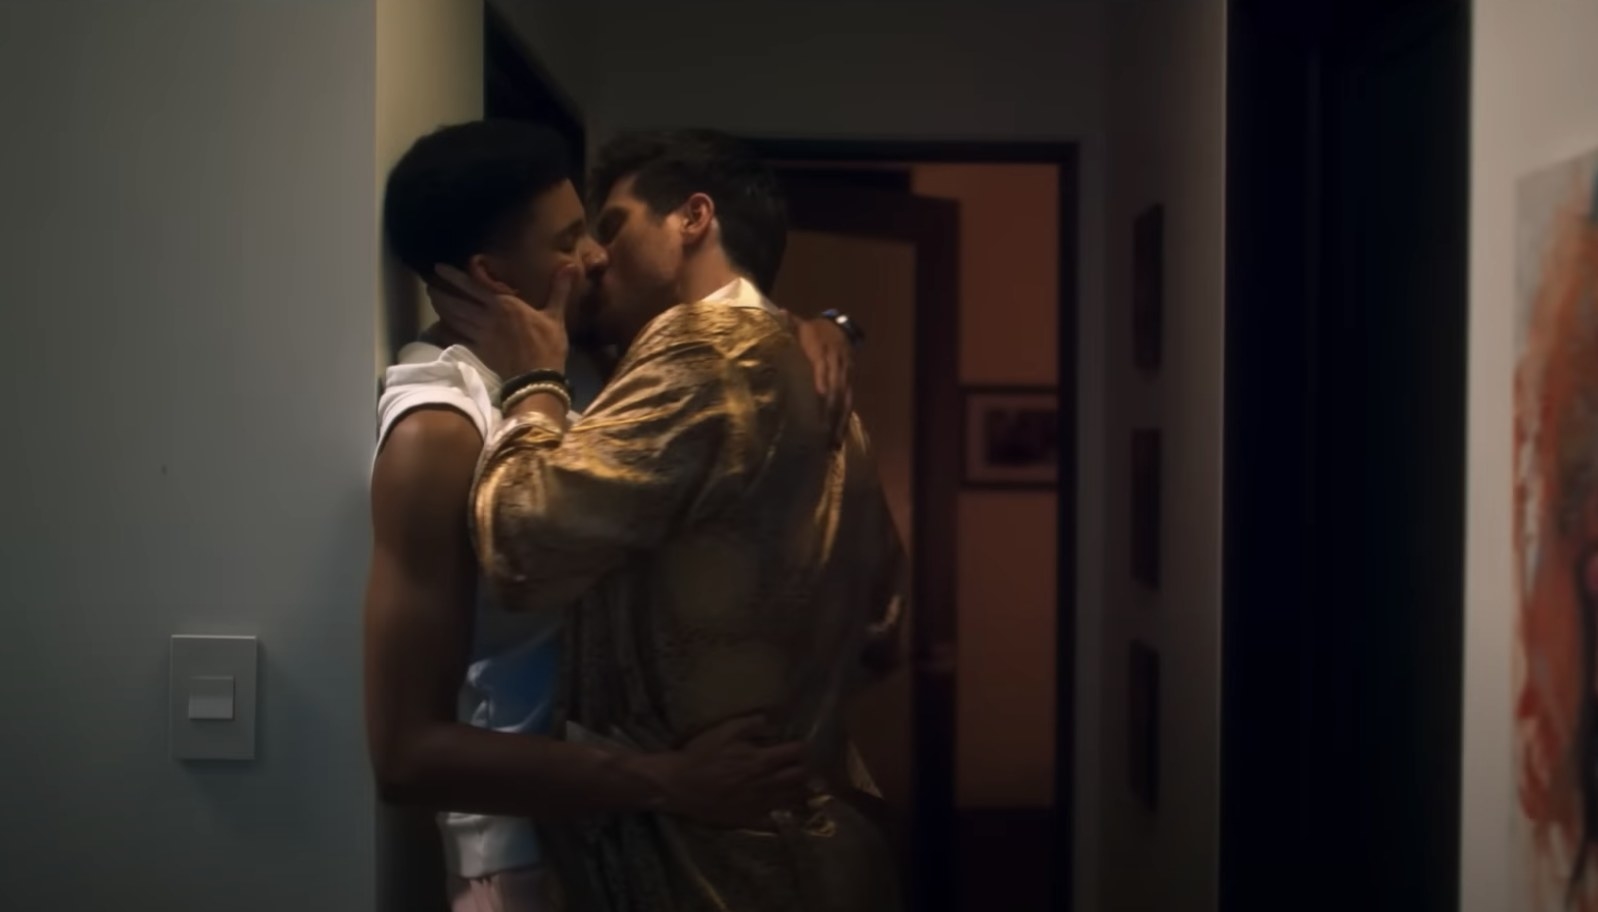 Keiynan Lonsdale and Marcus Rosner make out in a scene from the movie